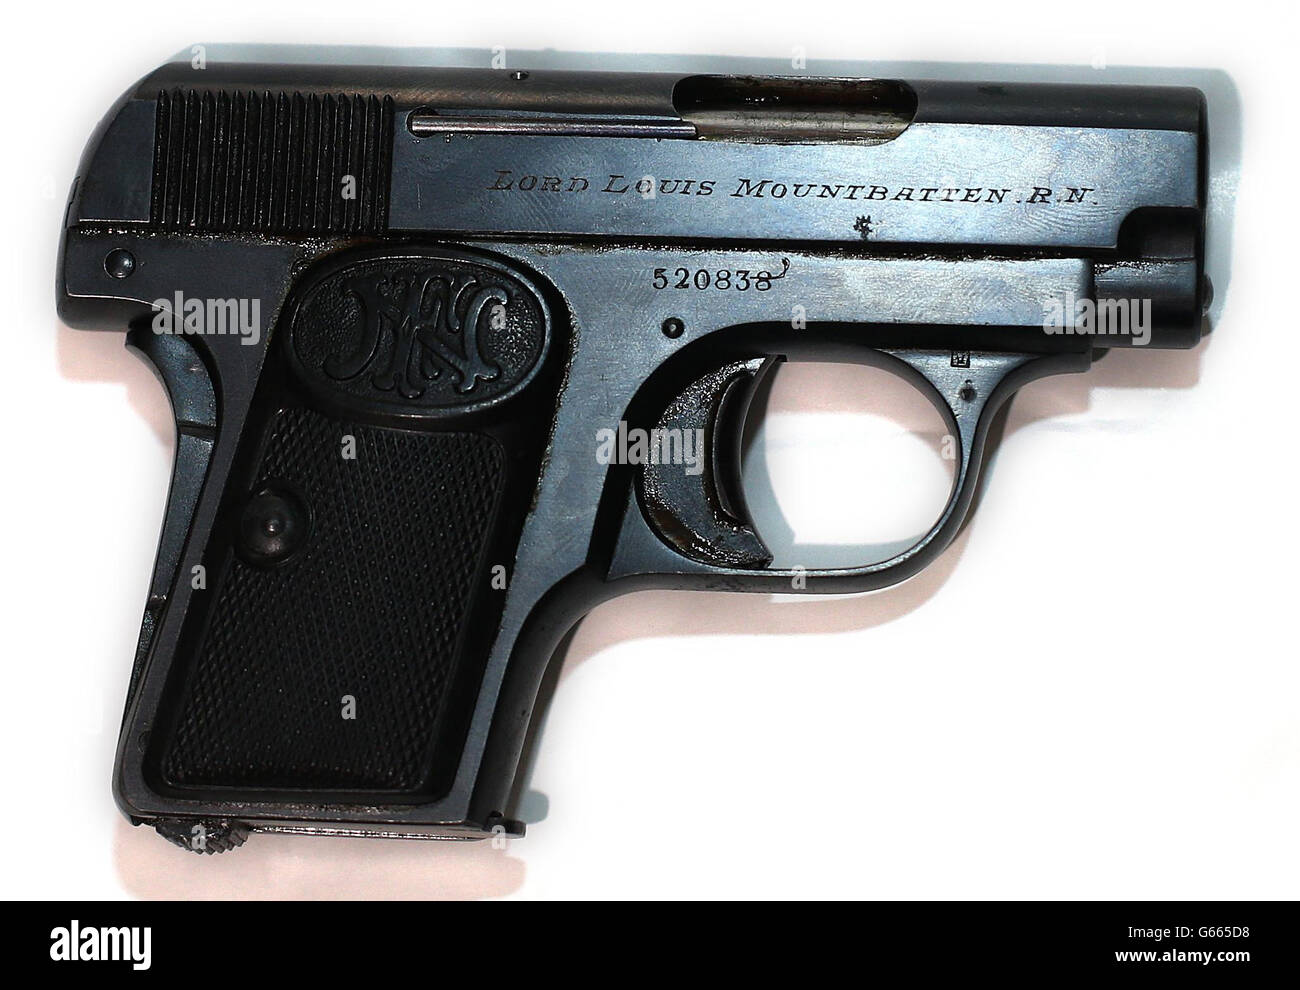 A personally-engraved pistol that belonged to Lord Mountbatten which Irish police are handing back to his family at a ceremony at the Ambassadors residence in Dublin. Stock Photo